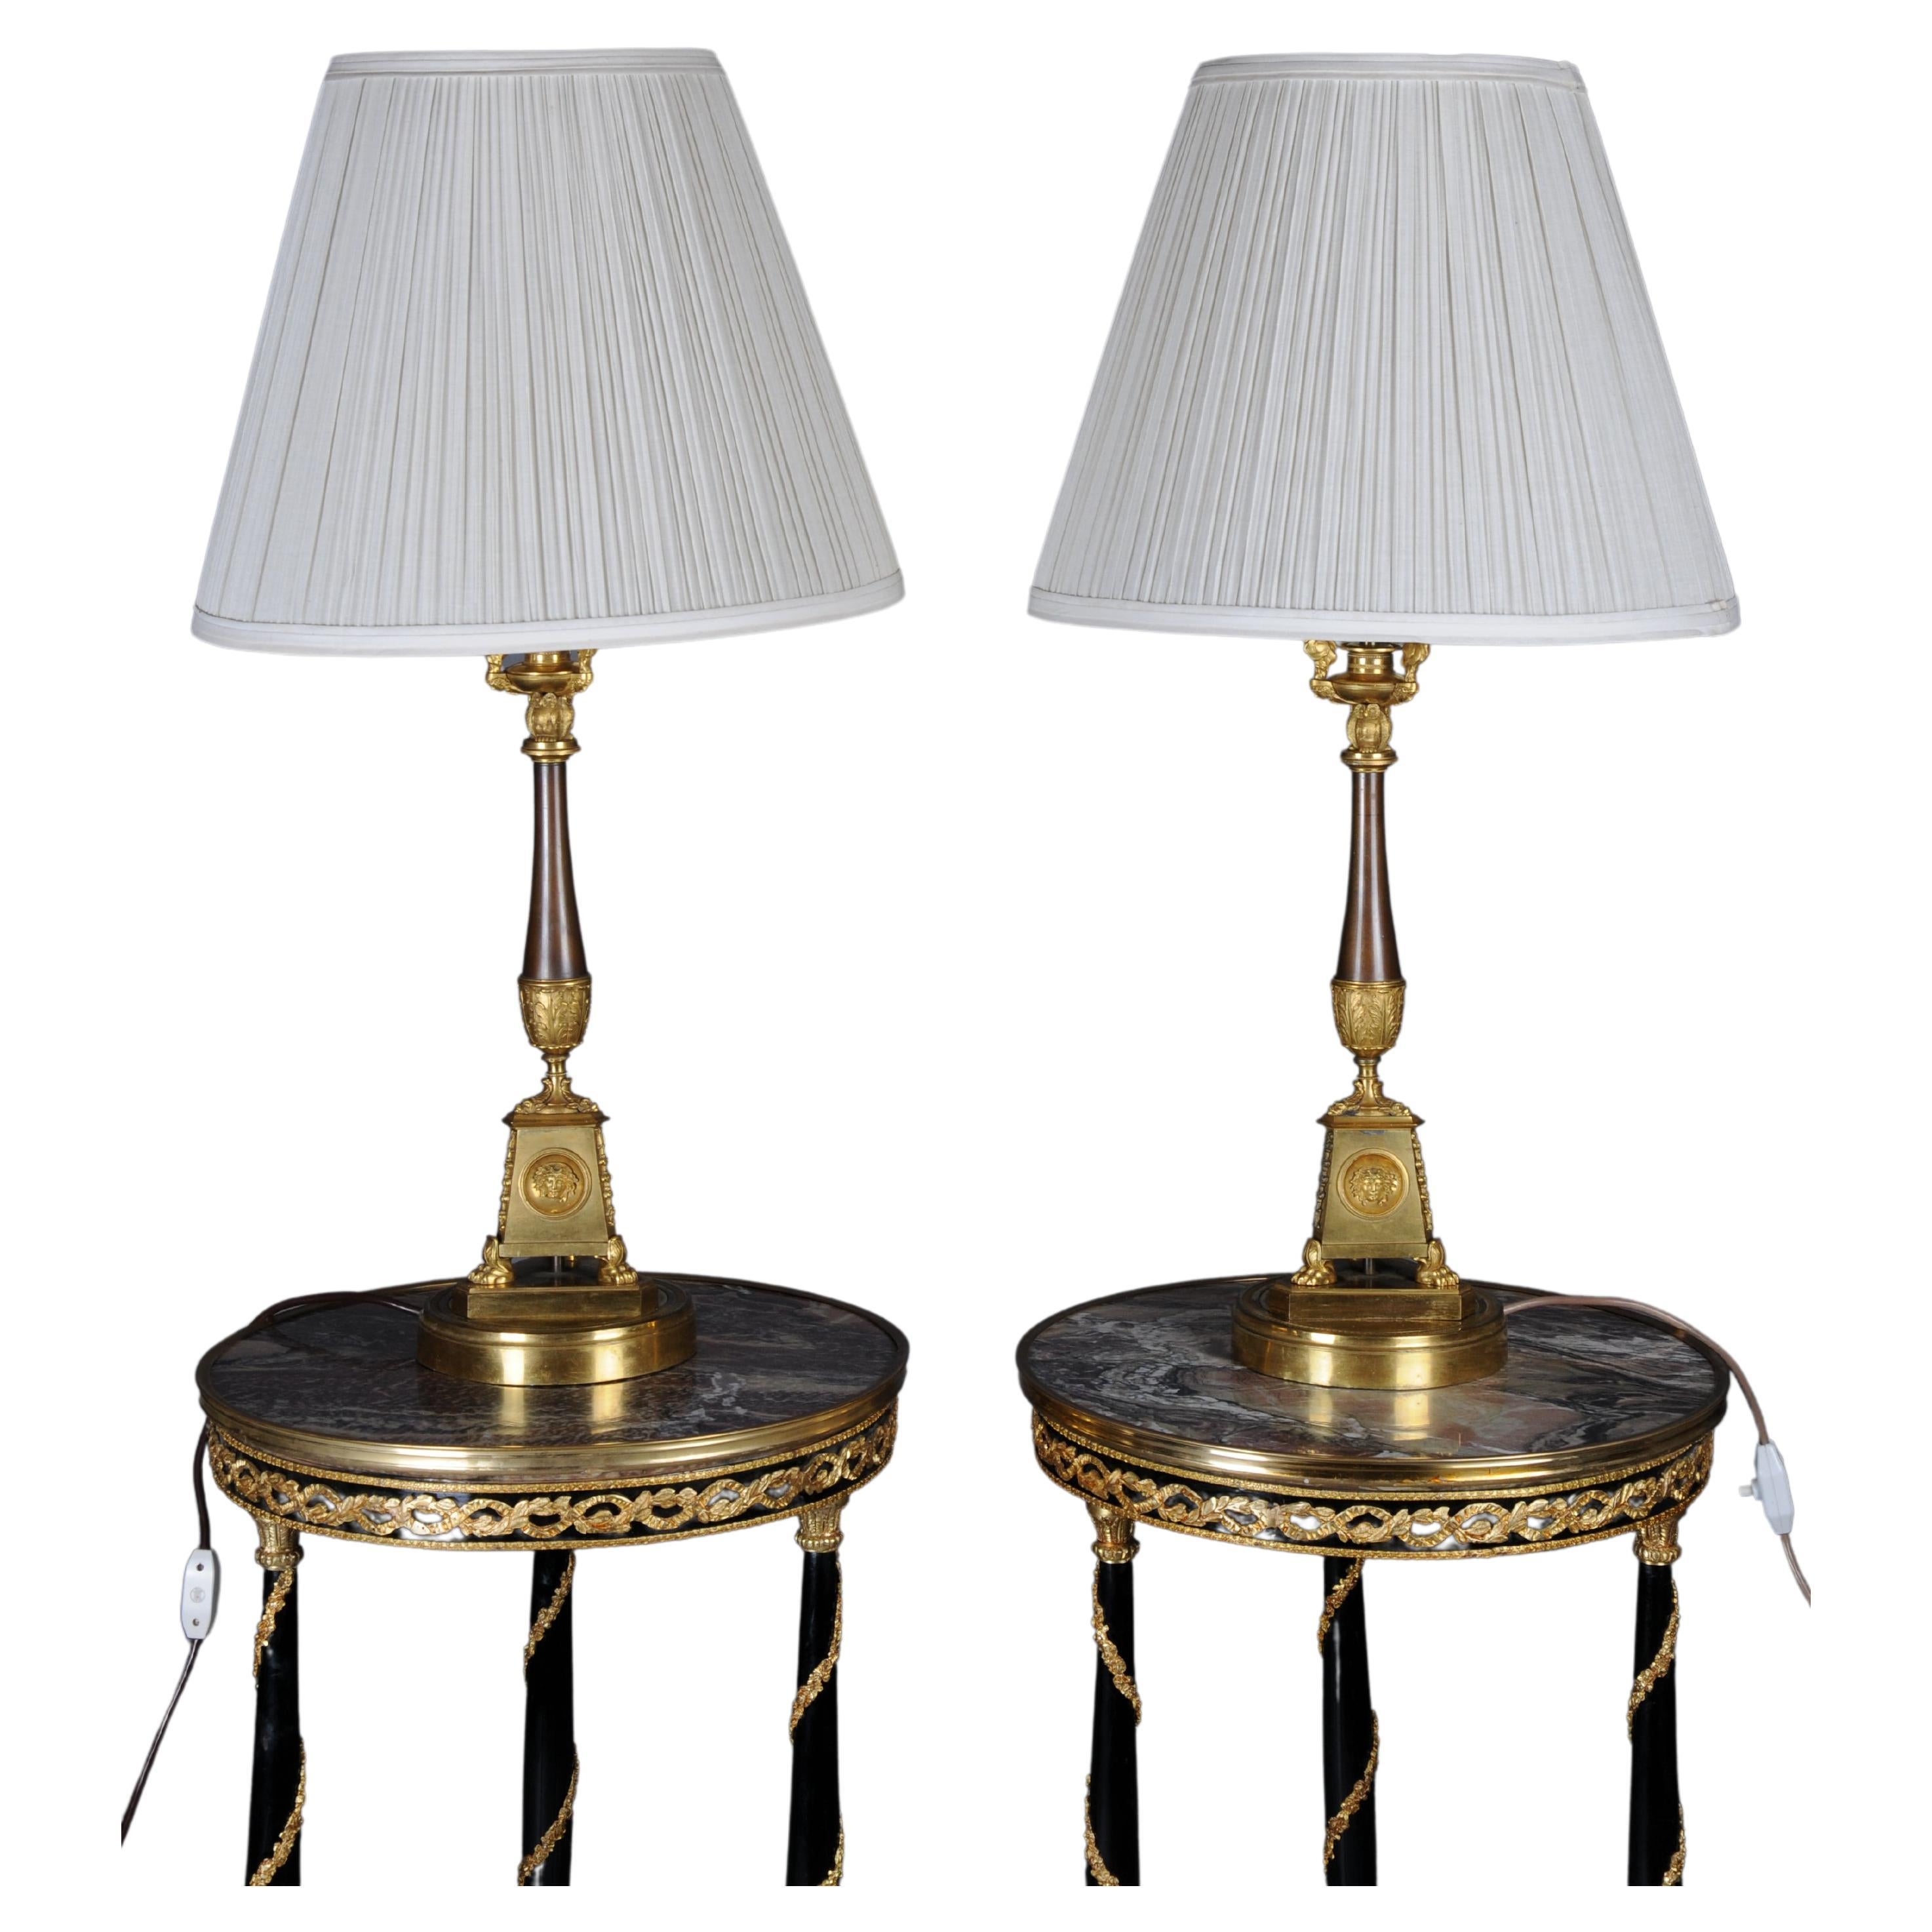 Pair (2) Empire bronze Table lamps around 1805, Paris, fire gilded. For Sale